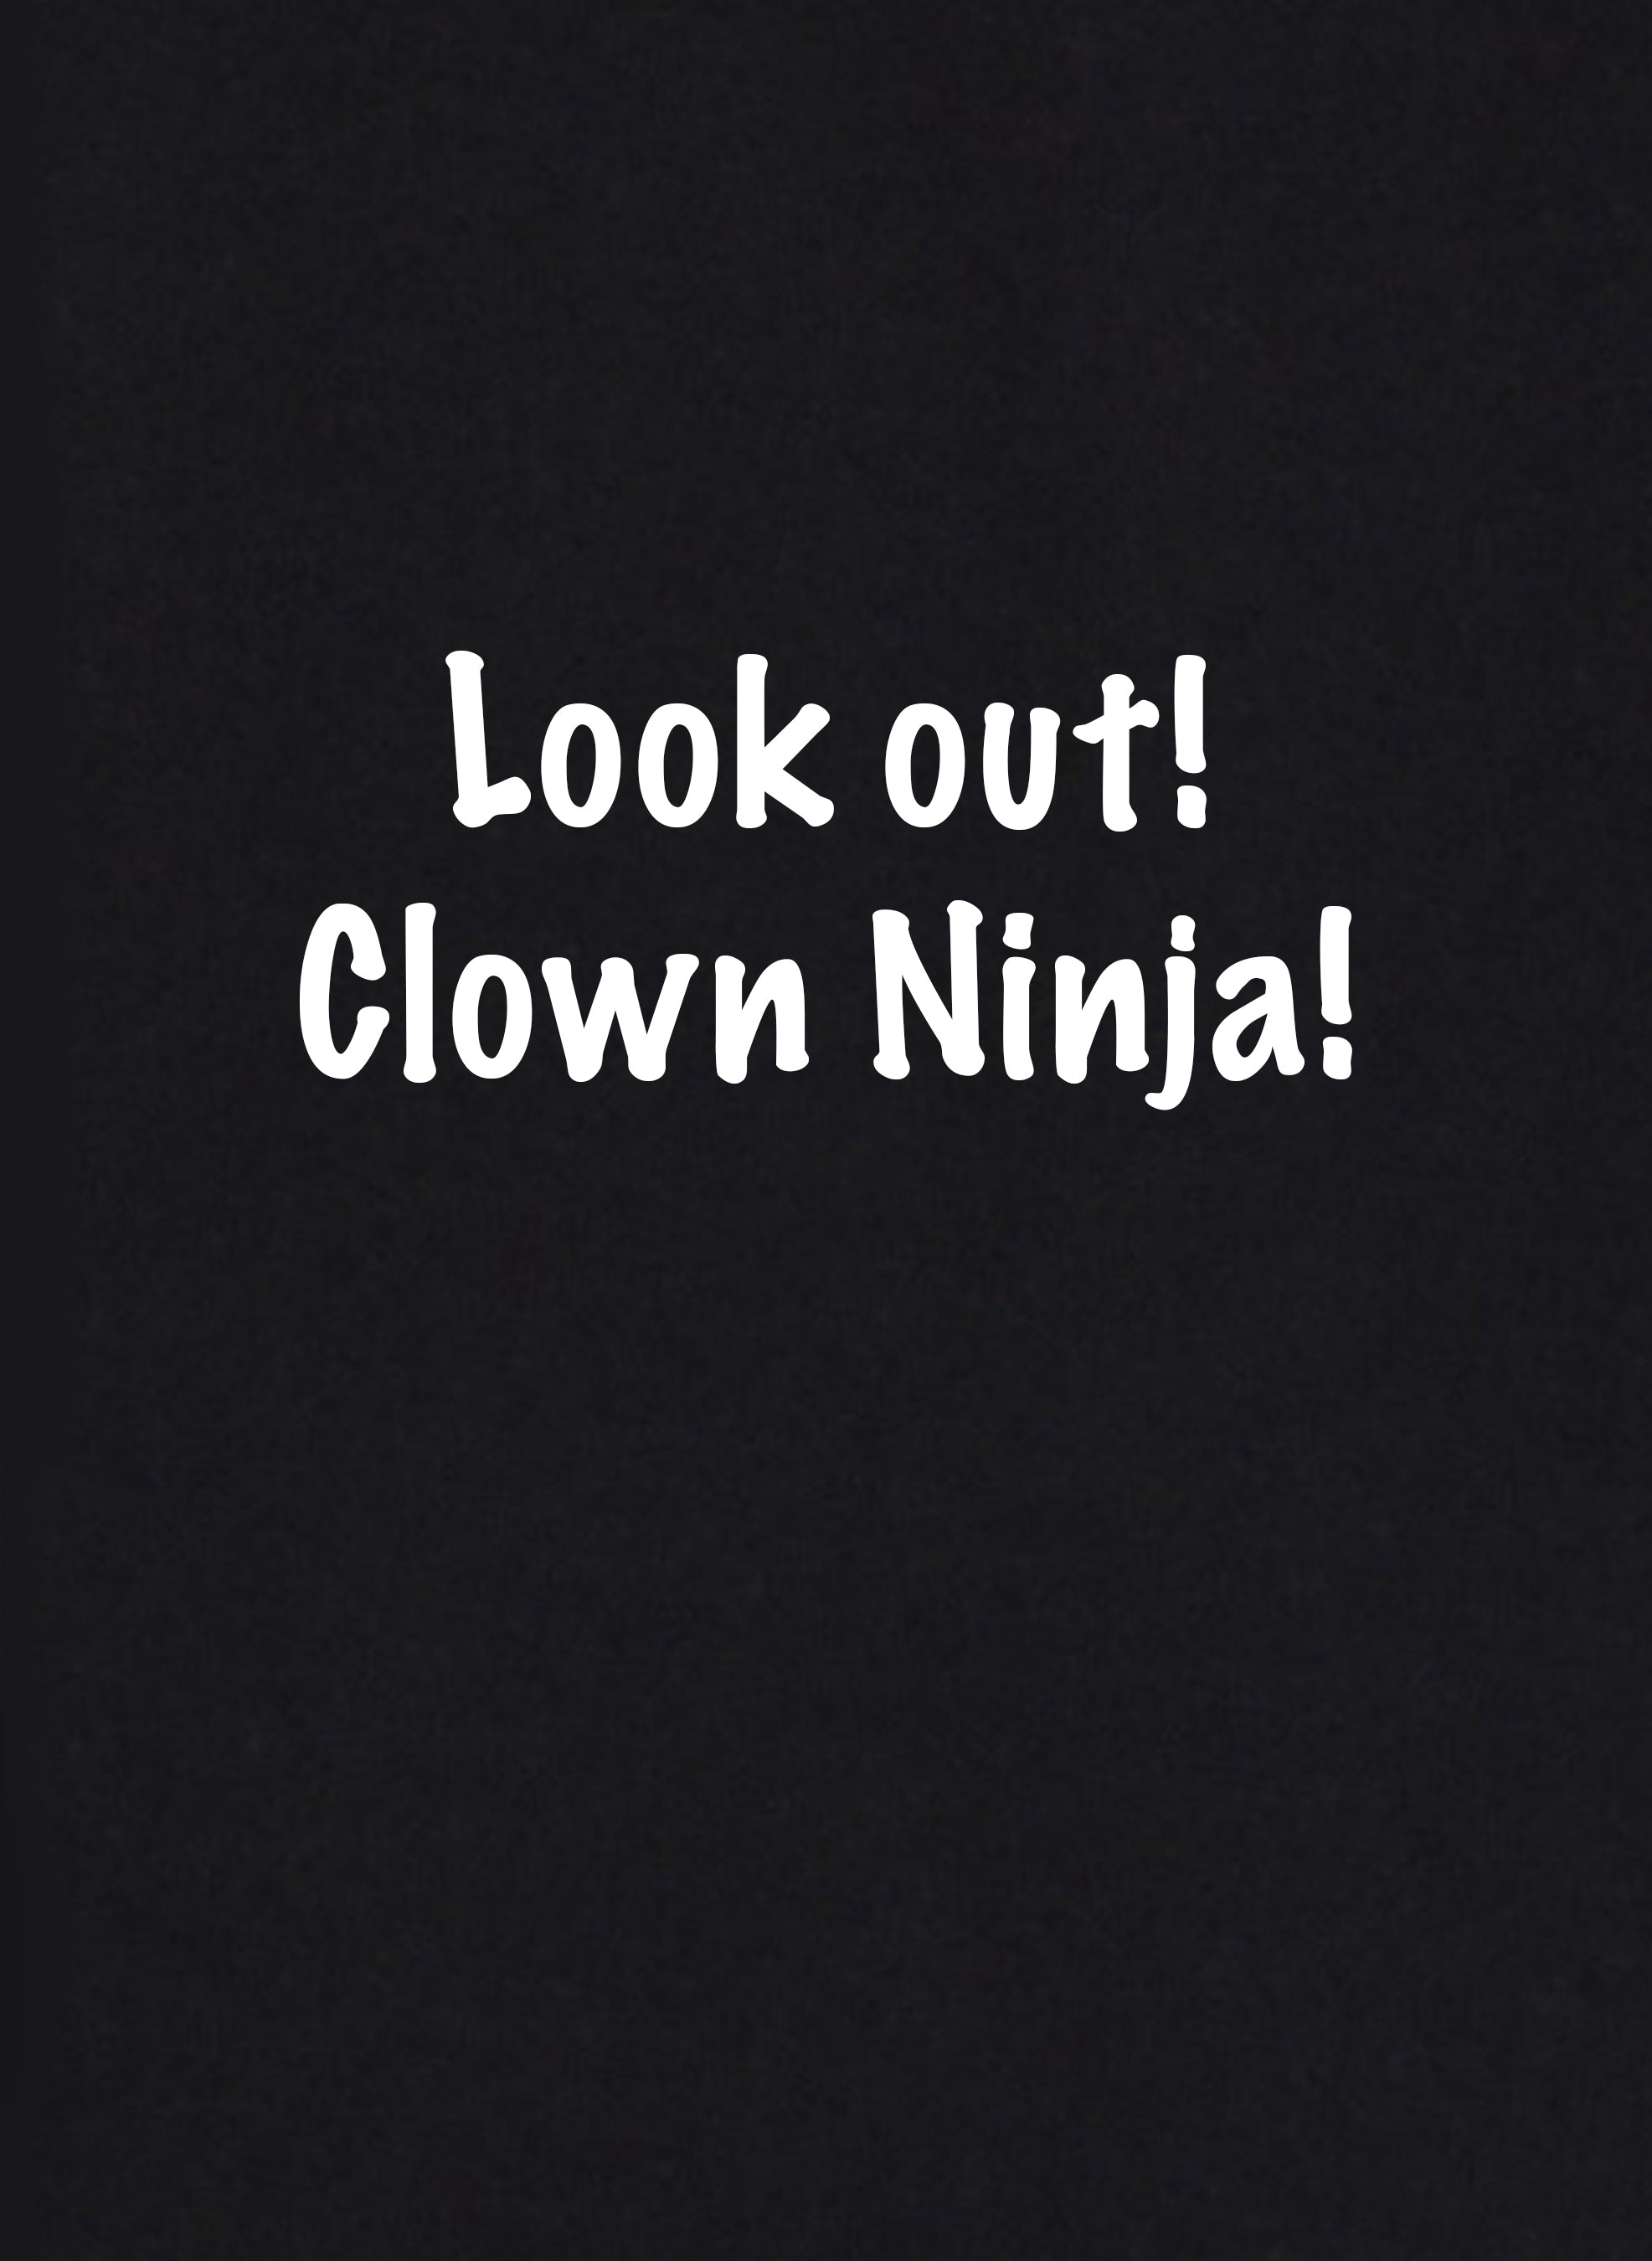 Cooltee clown ninja. only available in